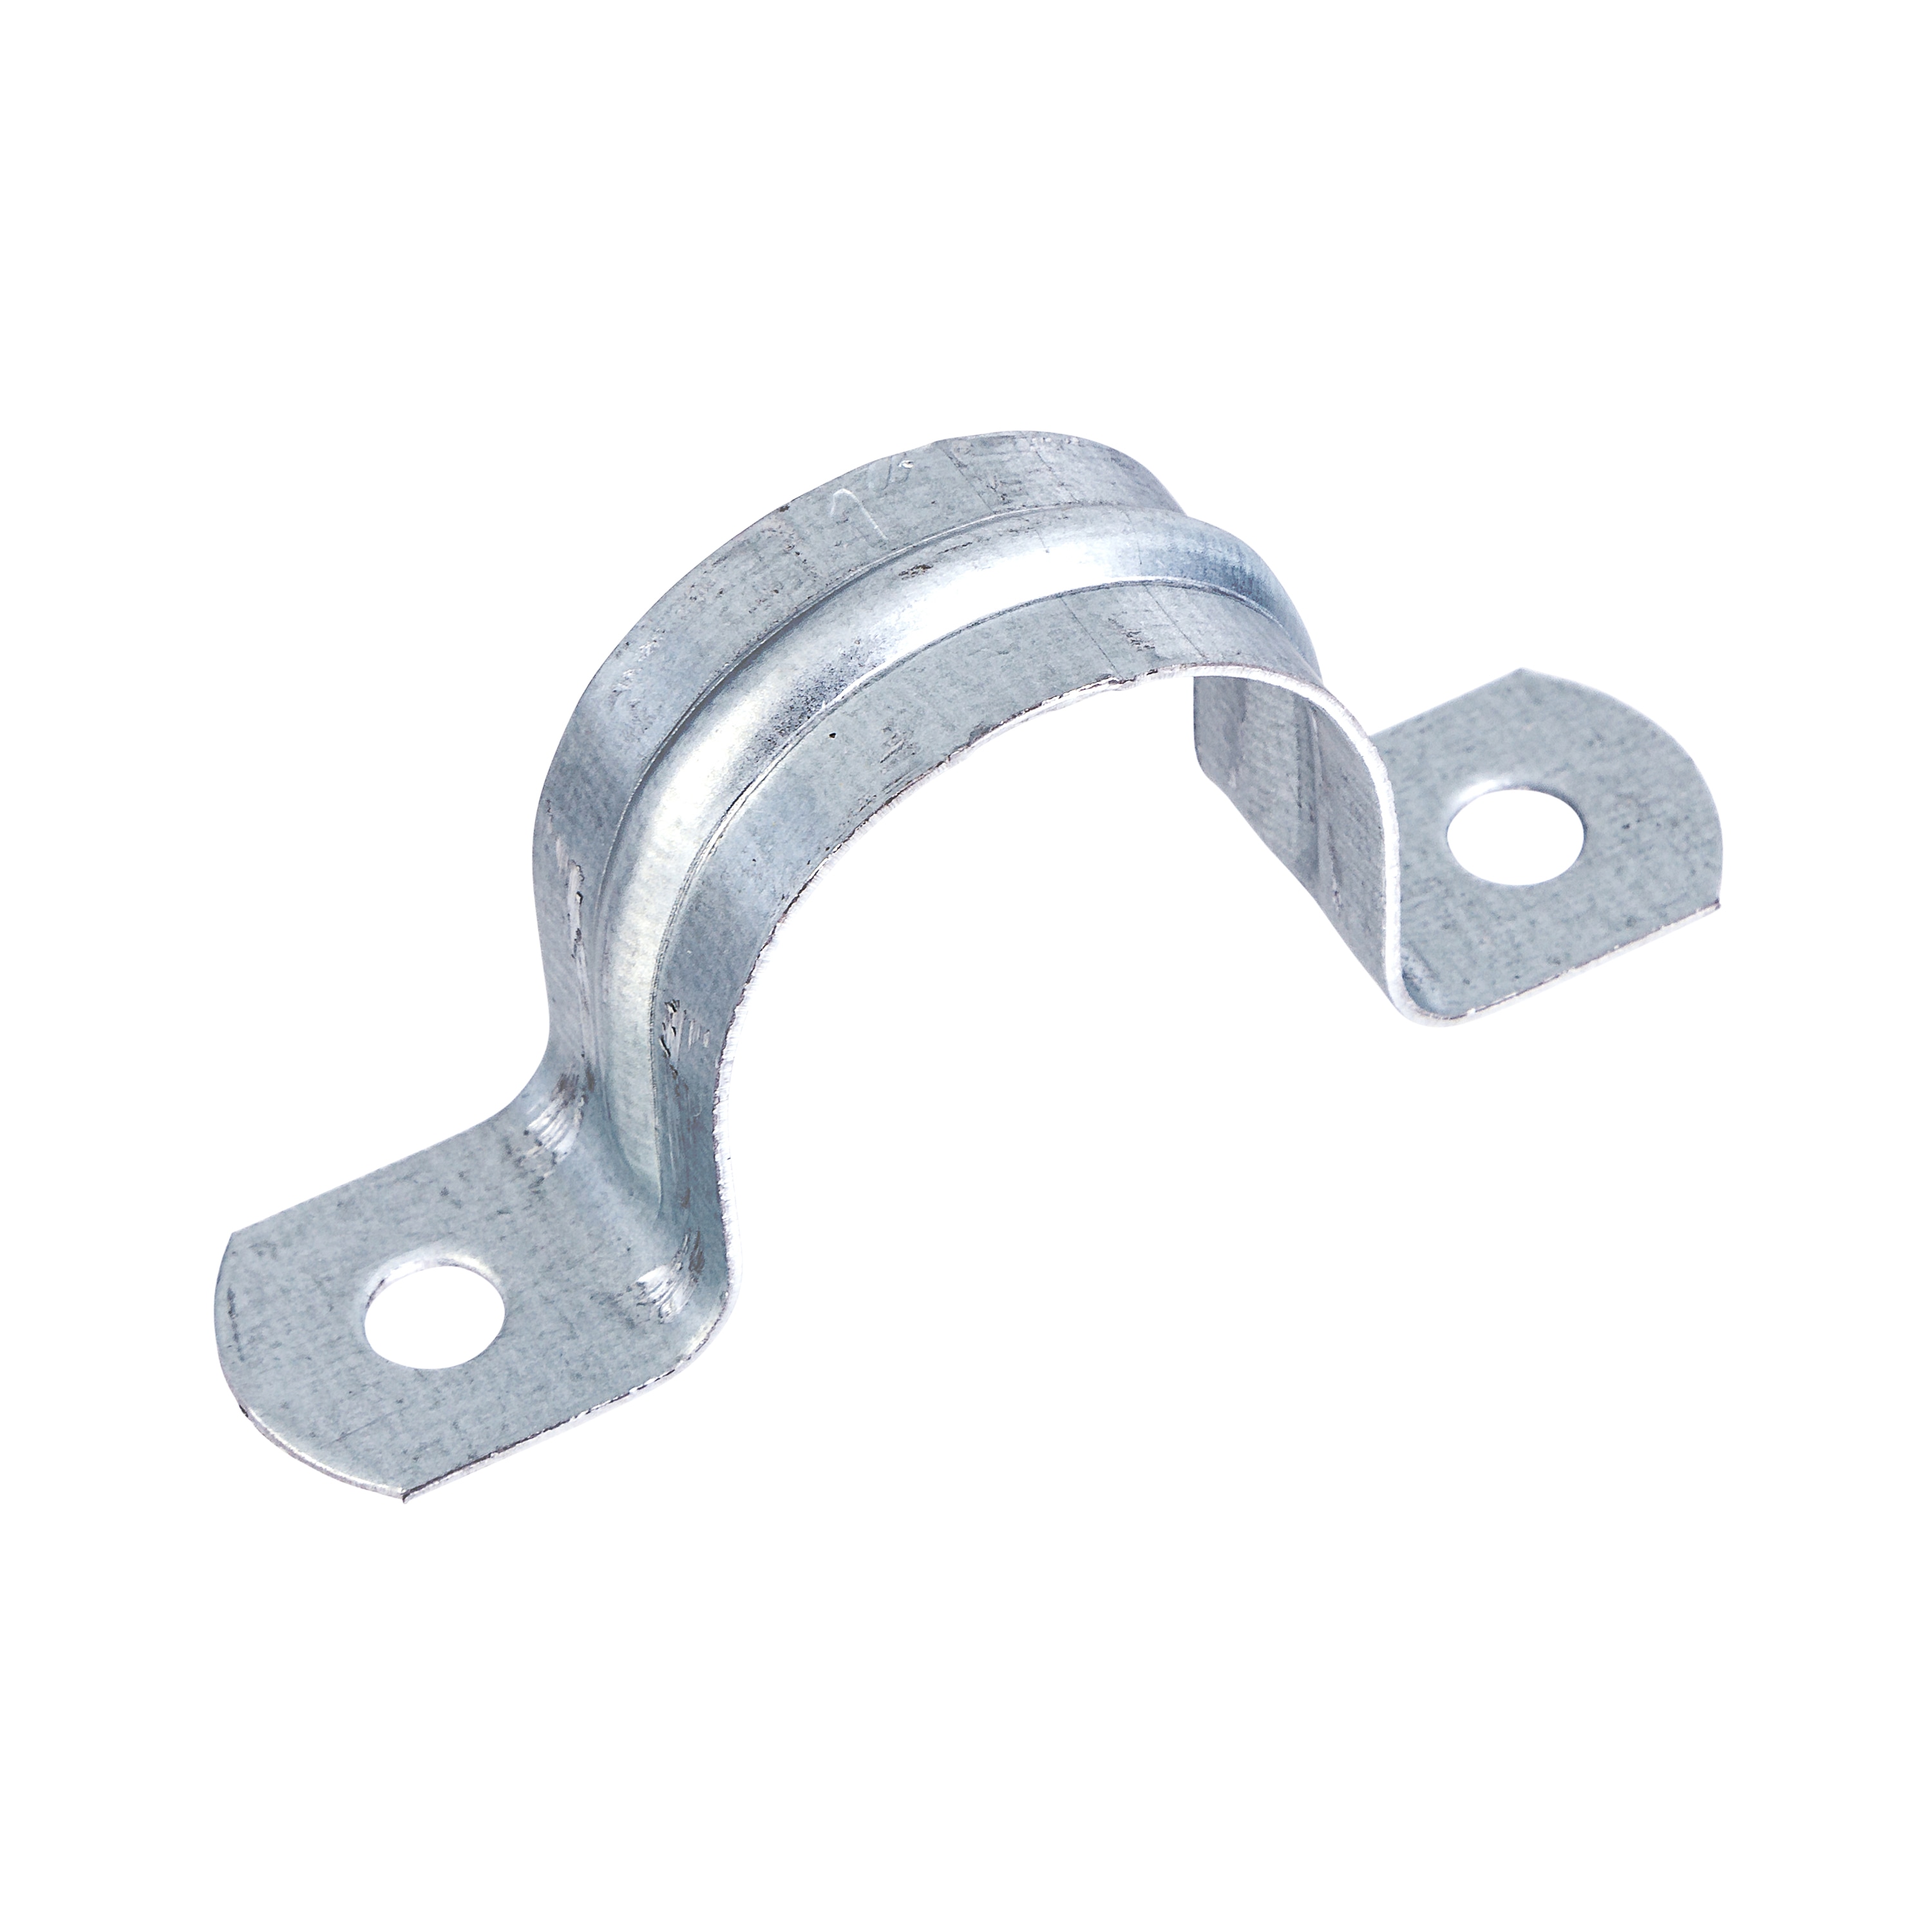 2-hole pipe strap Pipe Support & Clamps at